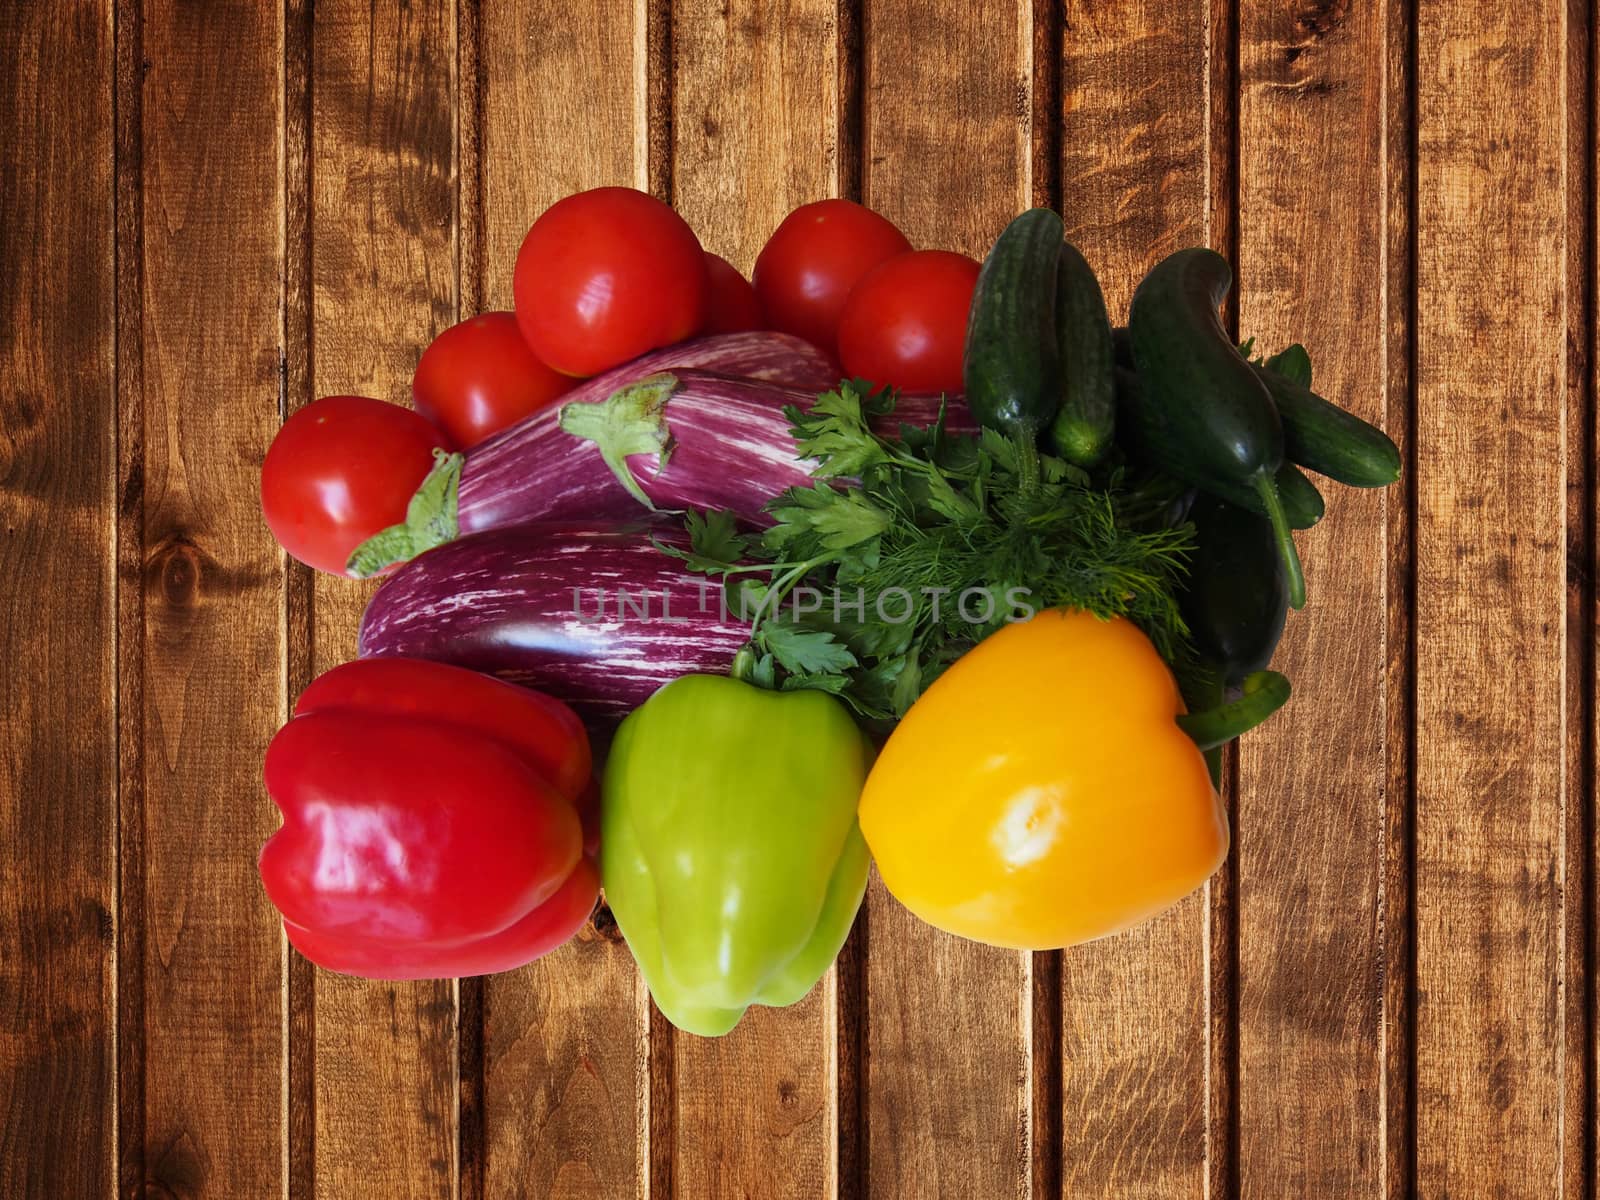 Harvest vegetables, tomatoes, cucumbers, peppers, eggplant and other vegetables. Food still life